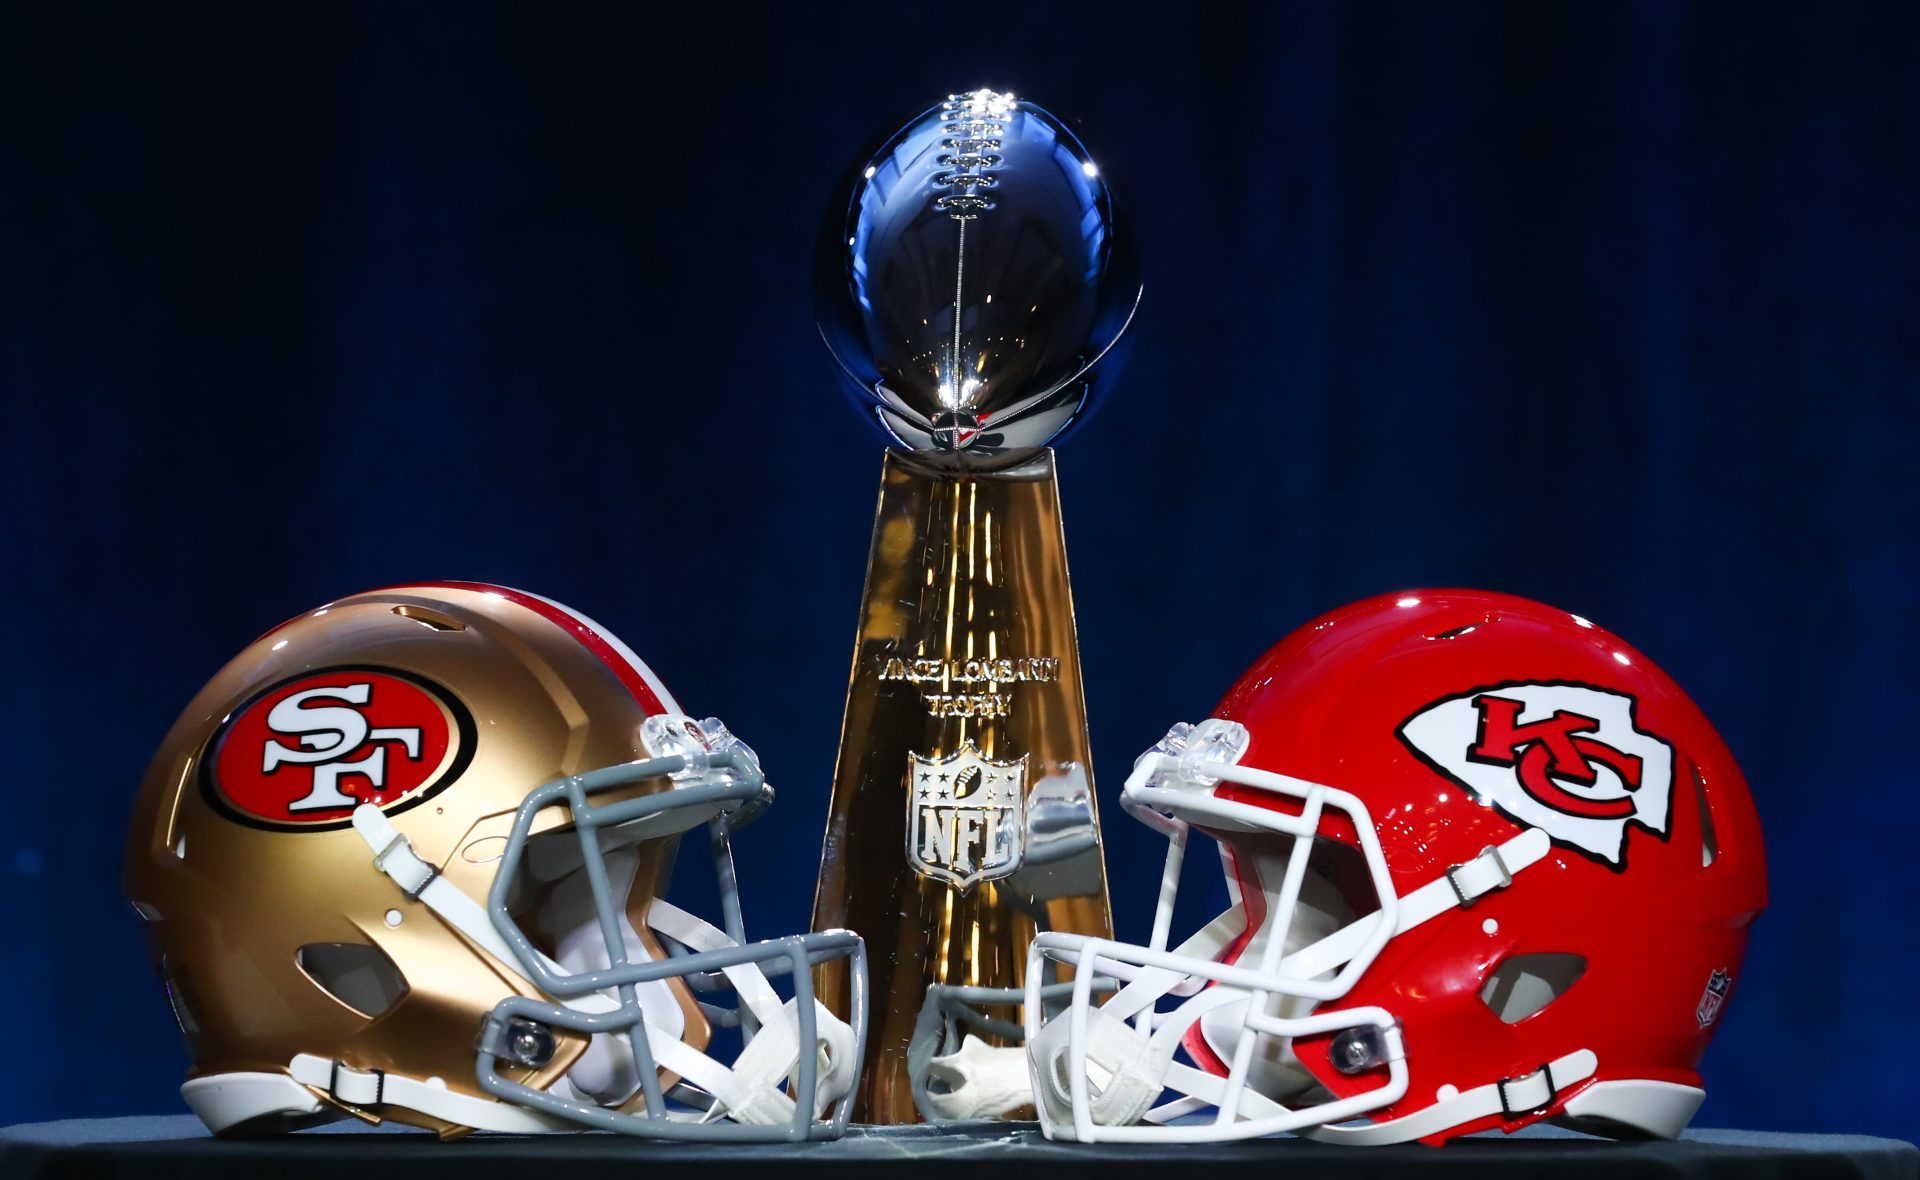 Issa Rematch Social Media Reacts To The Kansas City Chiefs San Francisco 49ers Facing Off In Super Bowl LVIII scaled e1706537888531